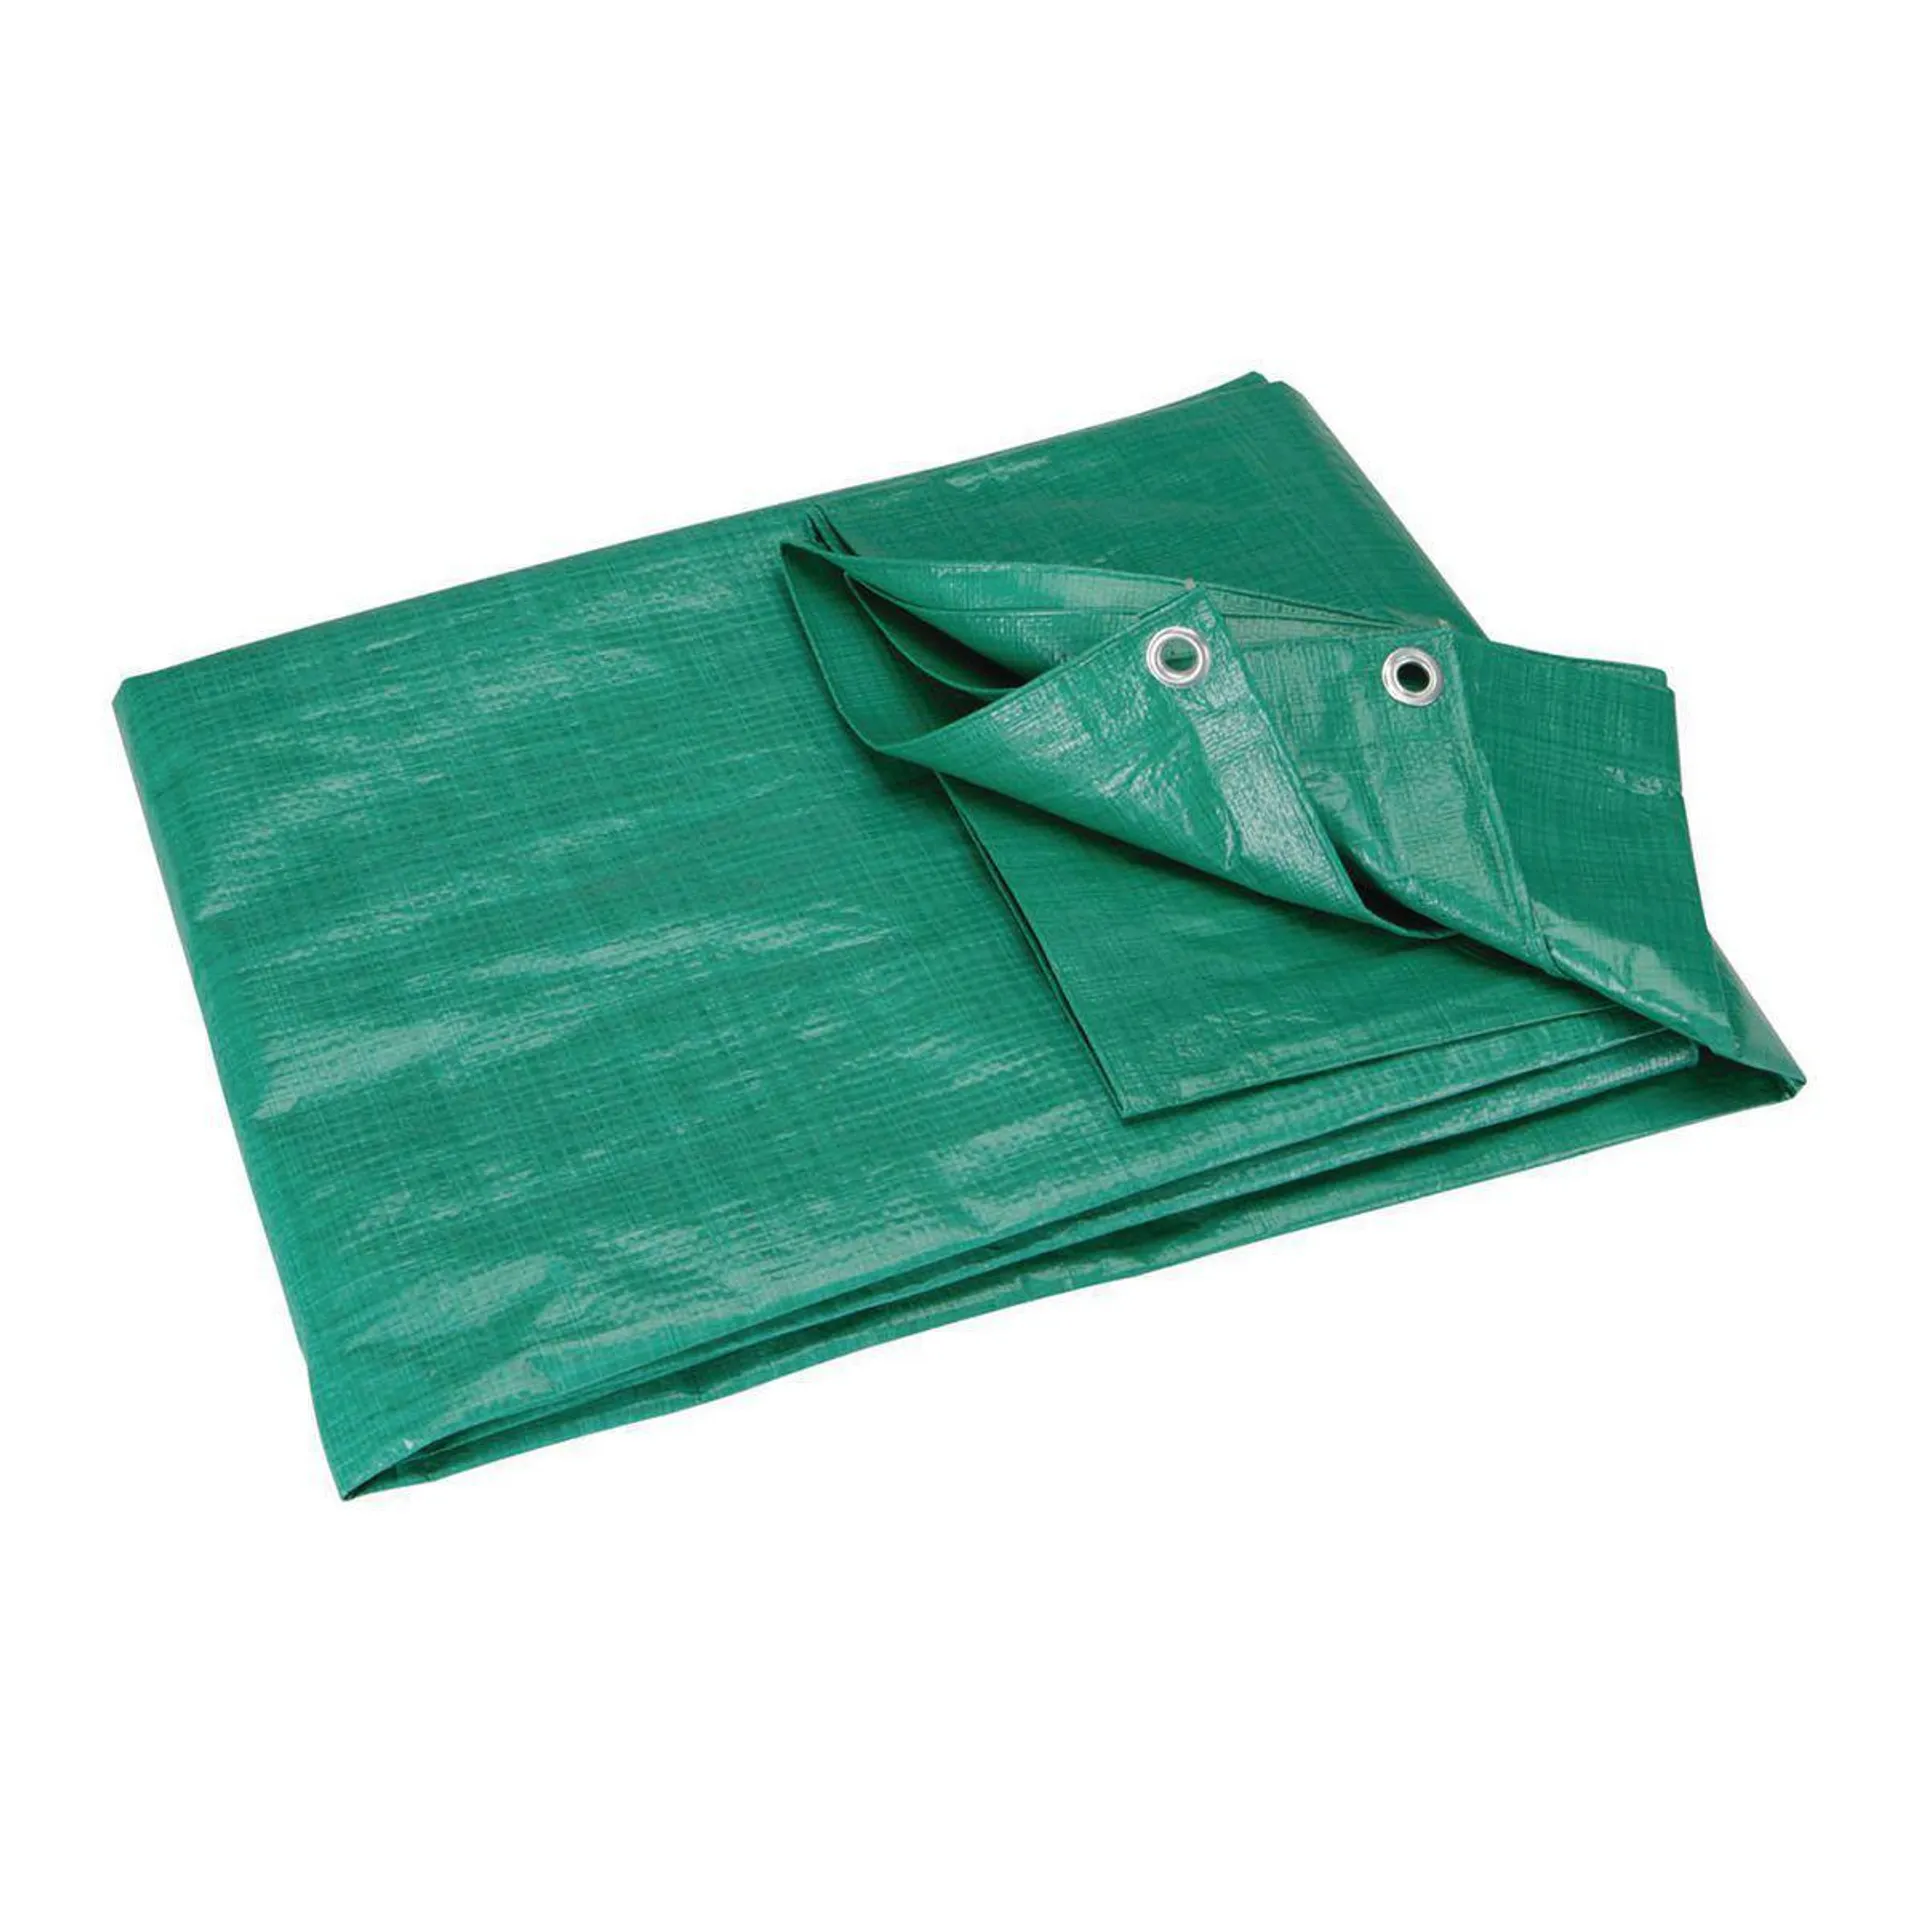 11 ft. 4 in. x 15 ft. 6 in. Green/Farm All-Purpose/Weather-Resistant Tarp